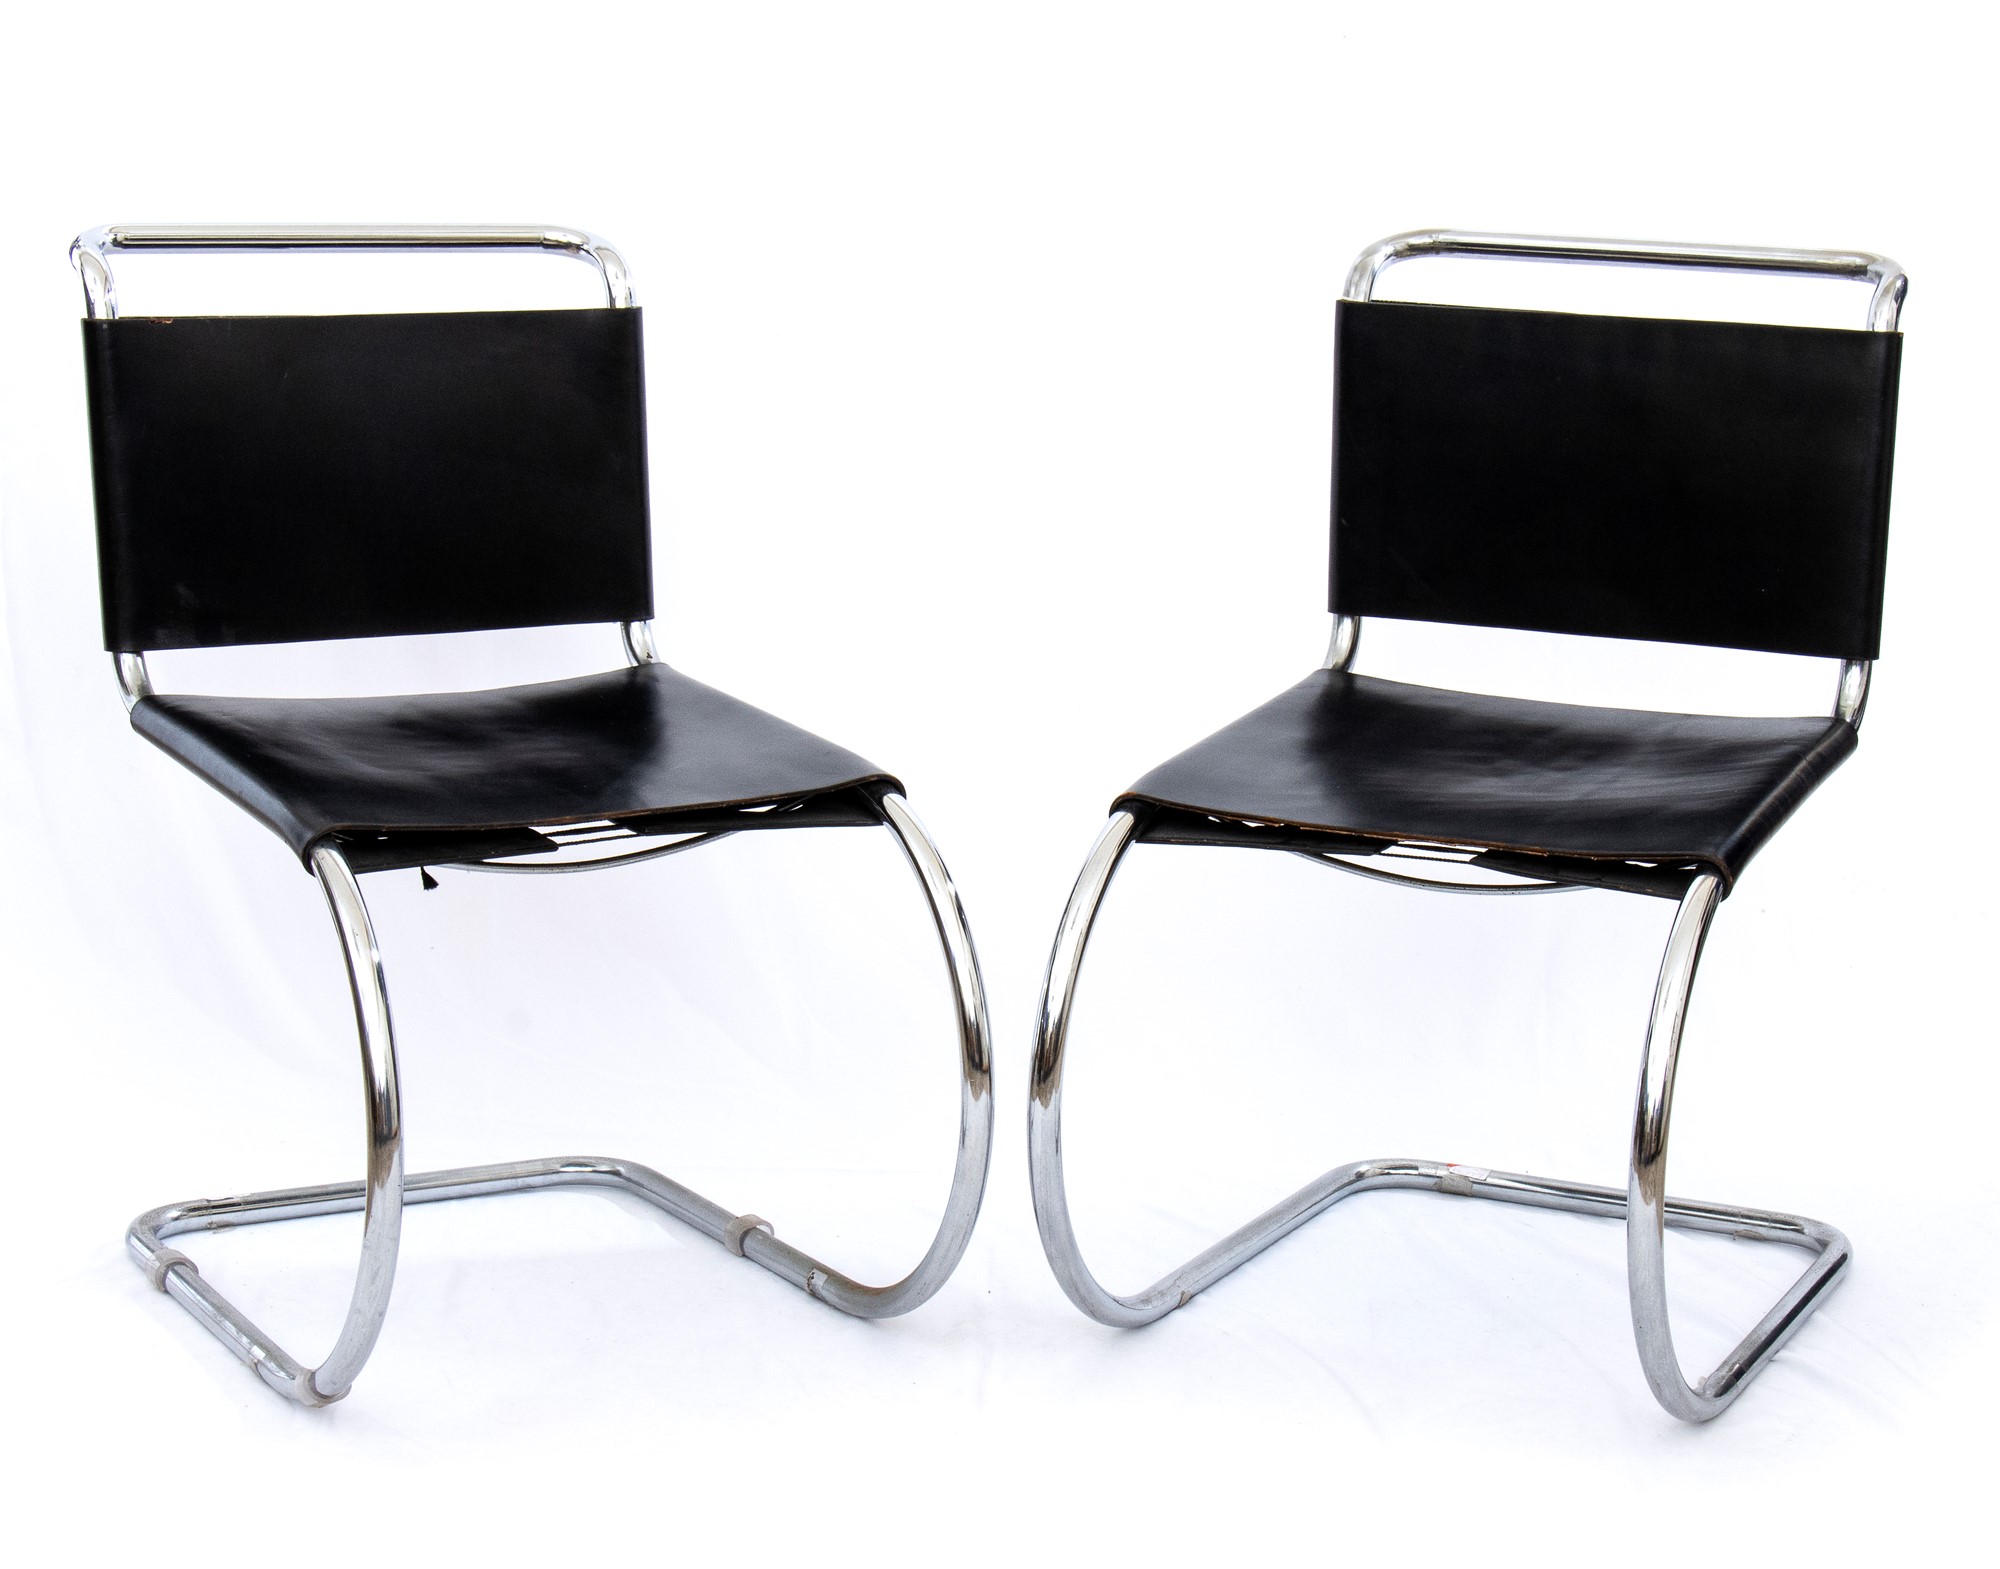 2 chairs in black leather and steel designed by Mart Stam and Marcer Beuer - Image 3 of 19